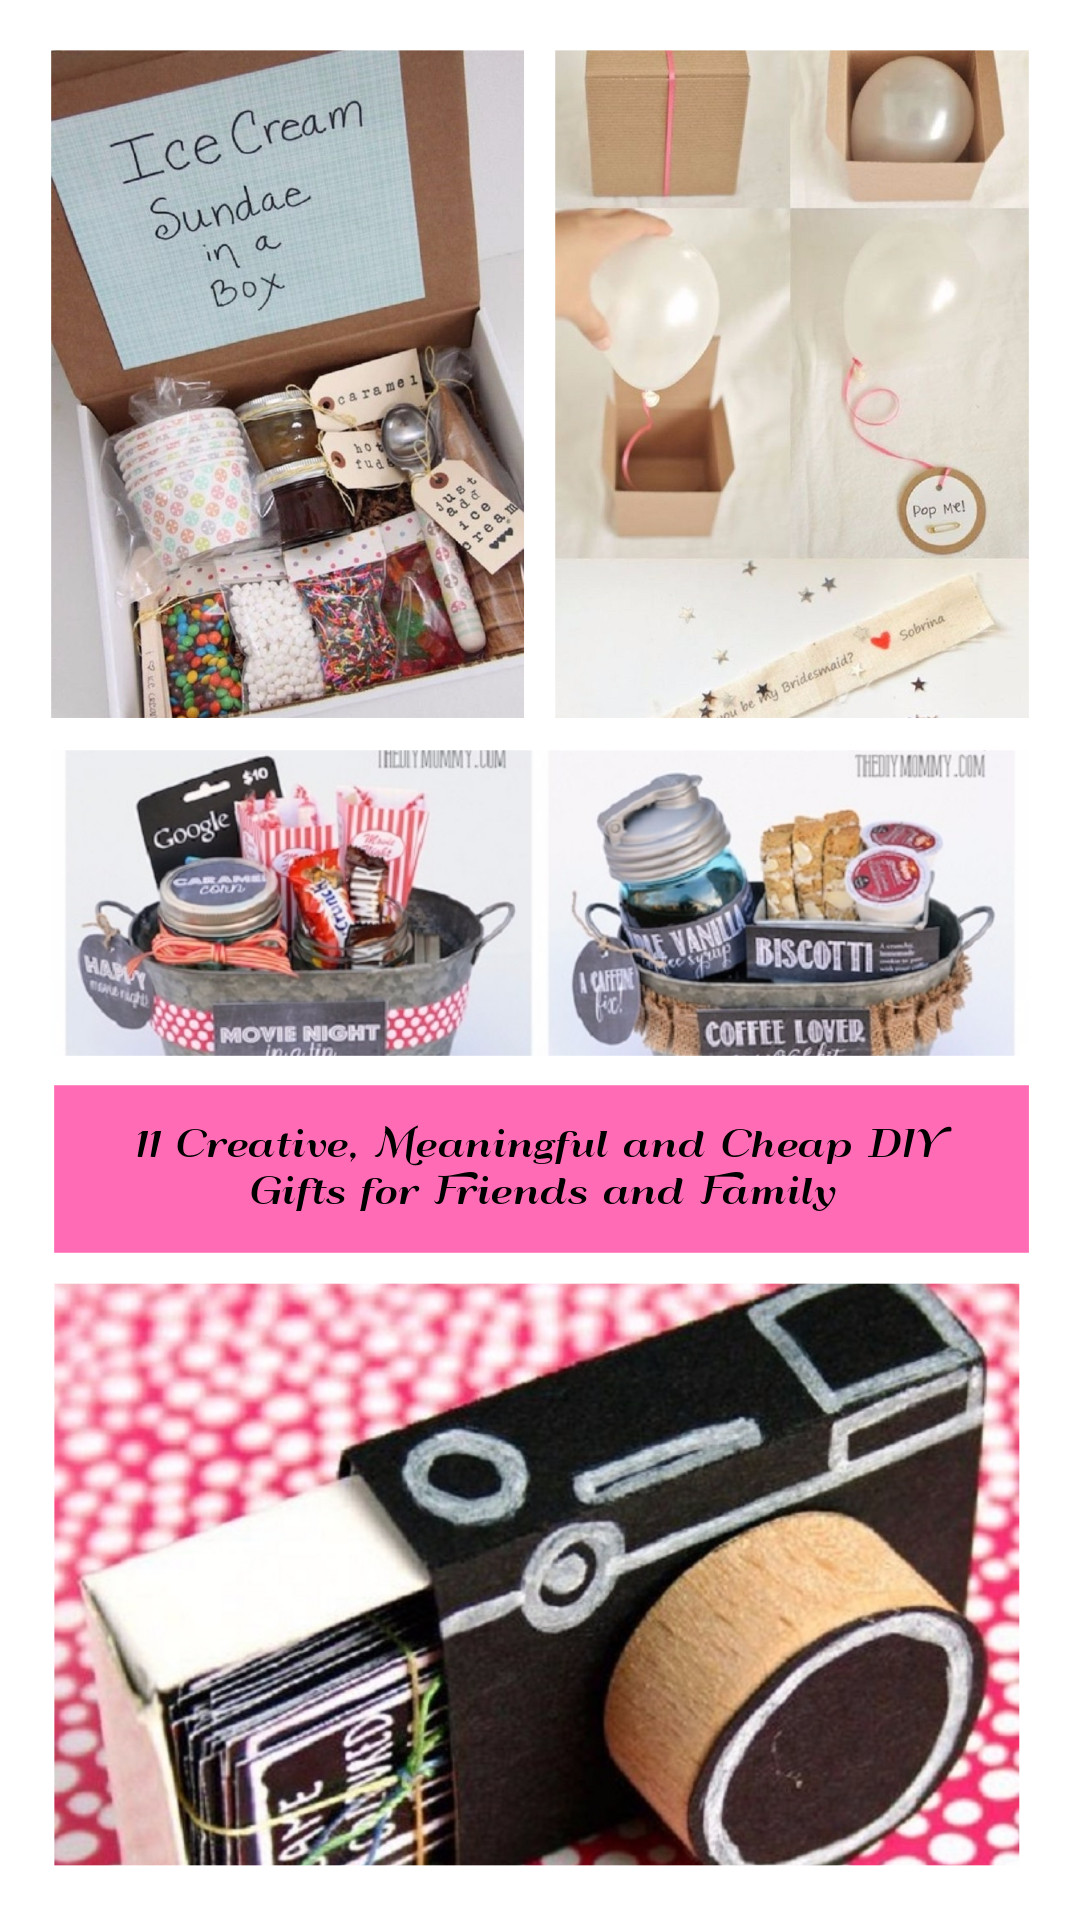 DIY Best Friend Birthday Gifts
 11 Creative Meaningful and Cheap DIY Gifts for Friends